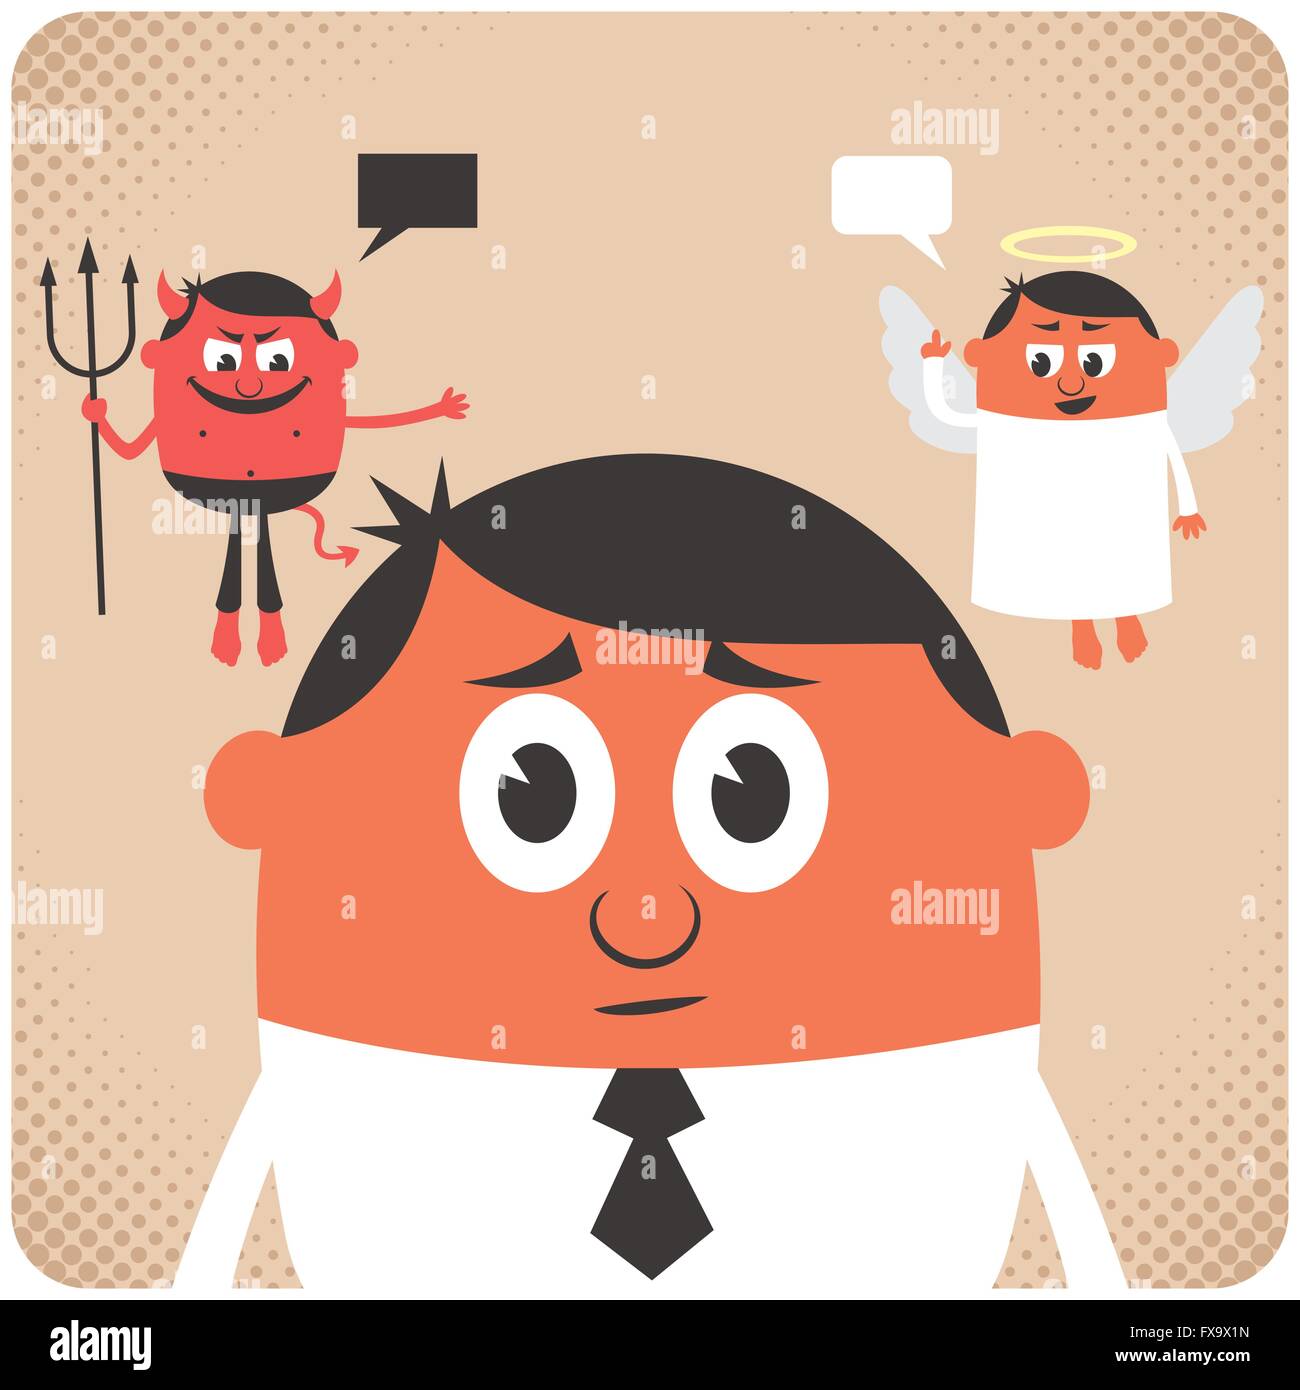 Man trying to make decision. Little angel and devil are giving him advice. No transparency used. Basic (linear) gradients. Stock Vector